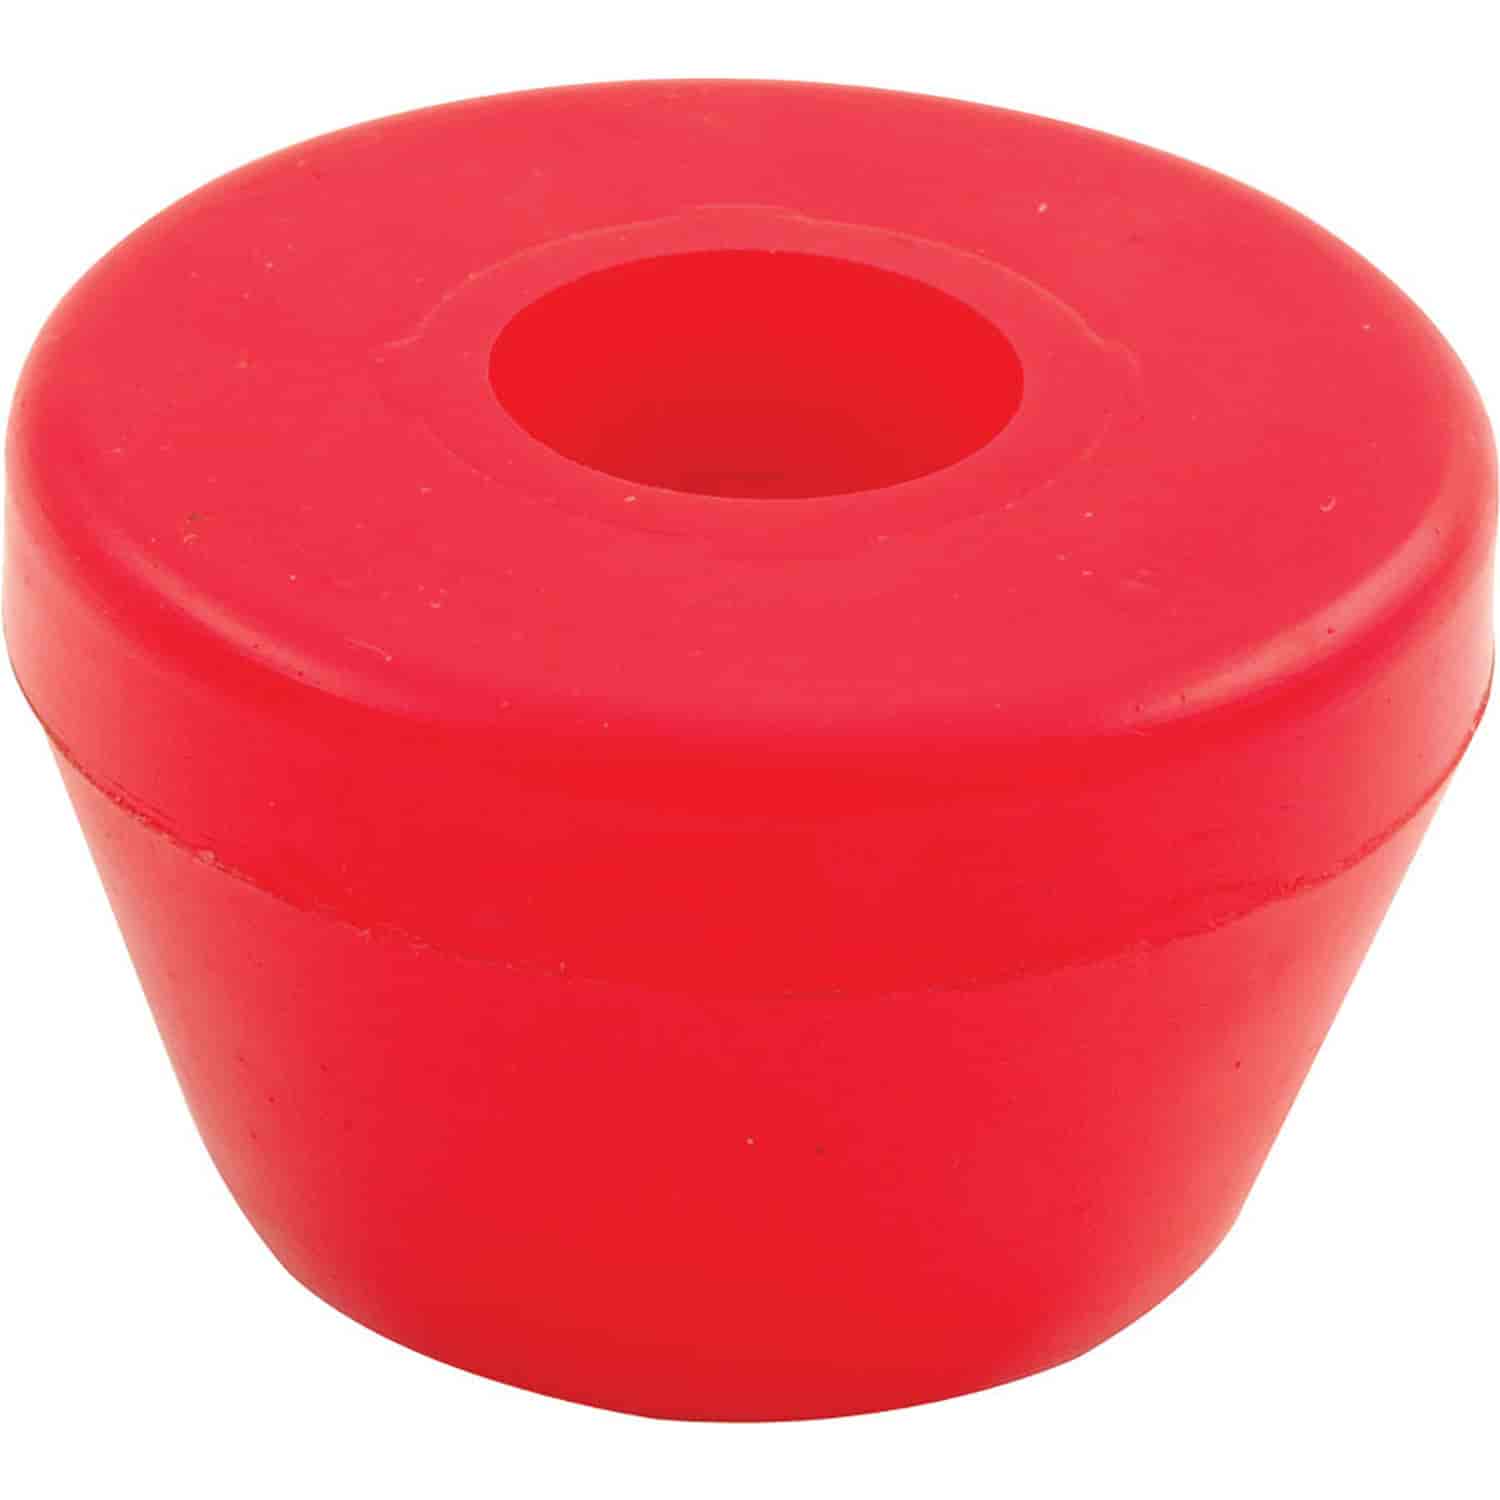 Replacement Bushing For Steel Torque Absorber